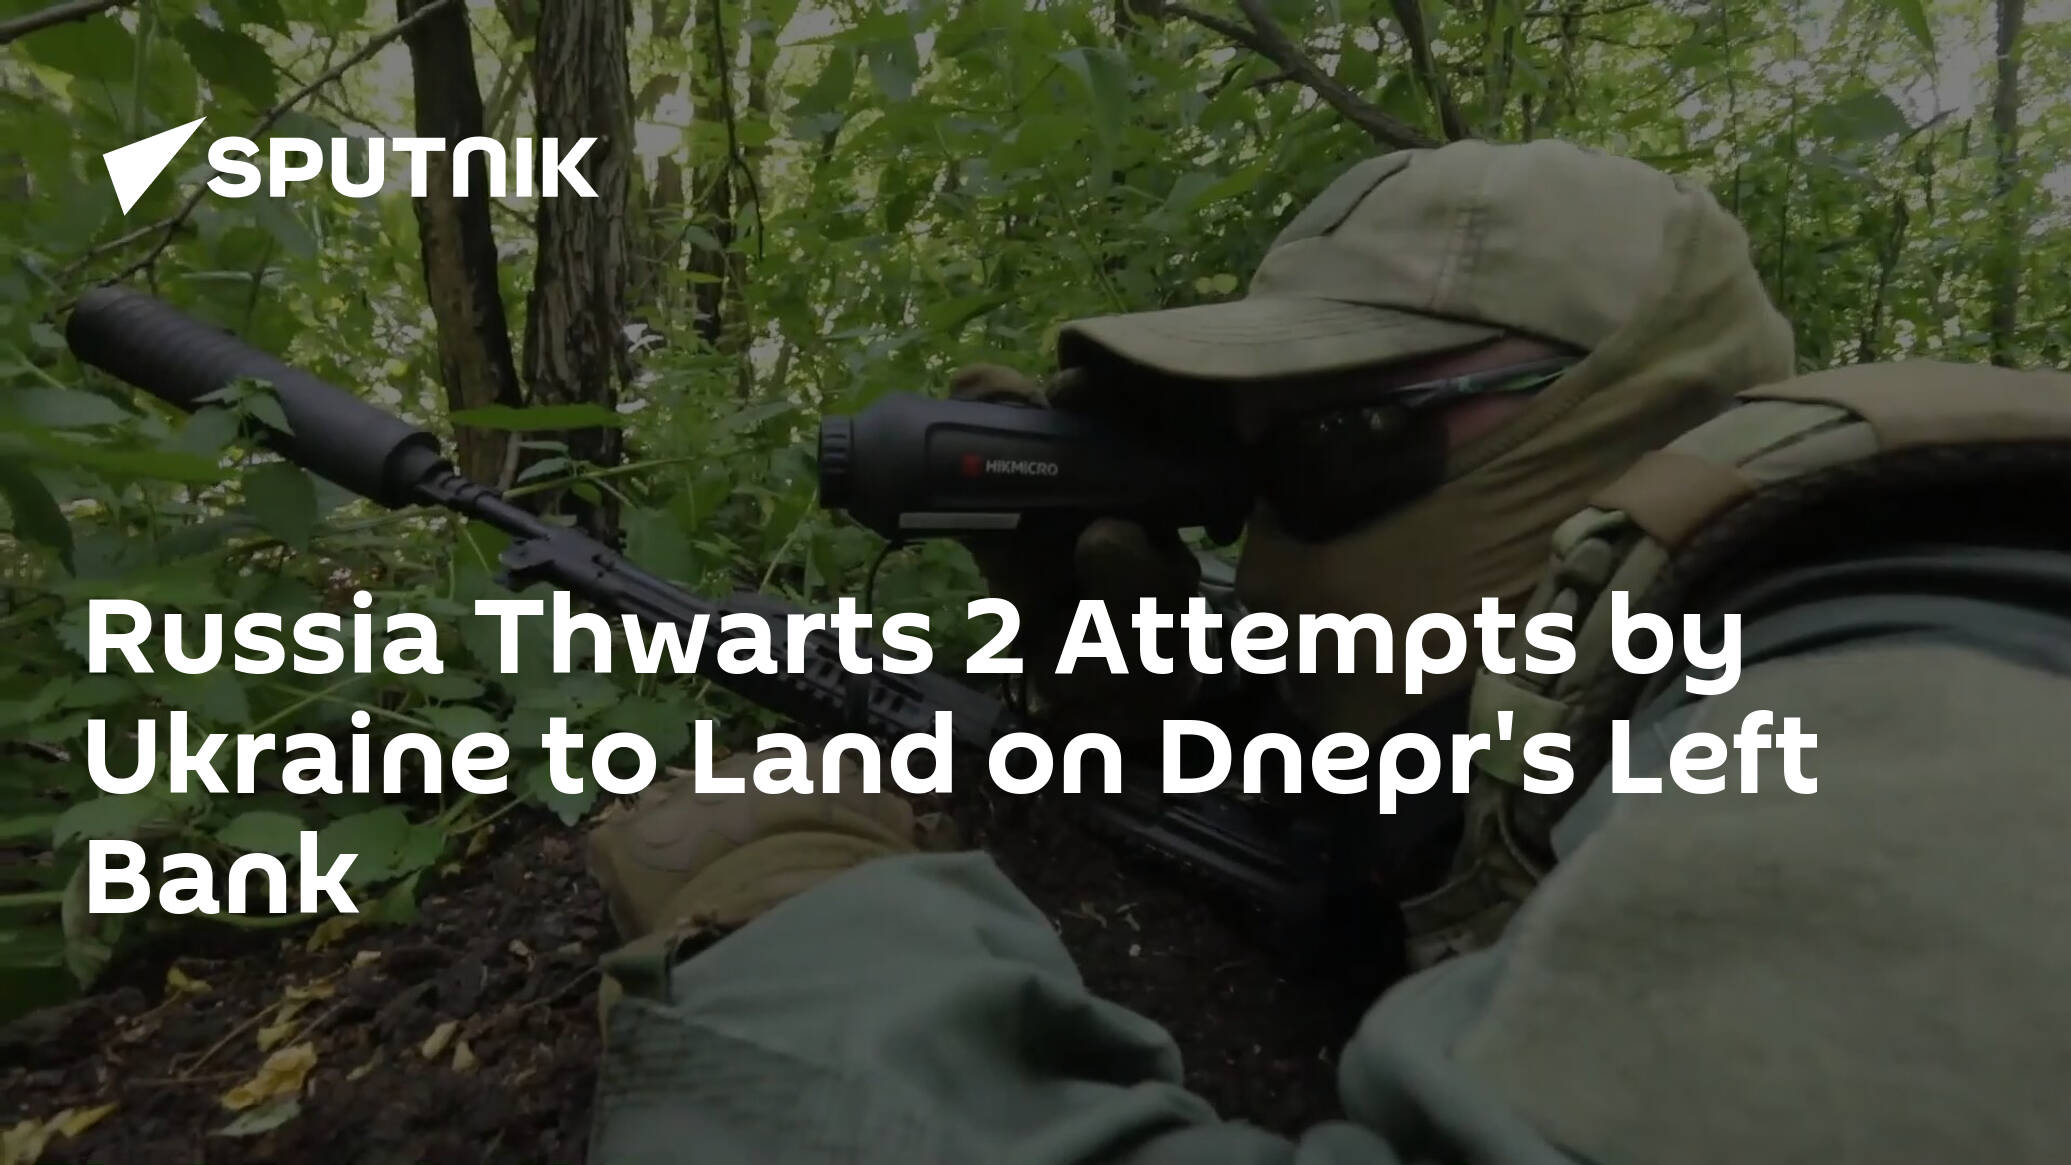 Russia Thwarts 2 Attempts by Ukraine to Land on Dnepr's Left Bank